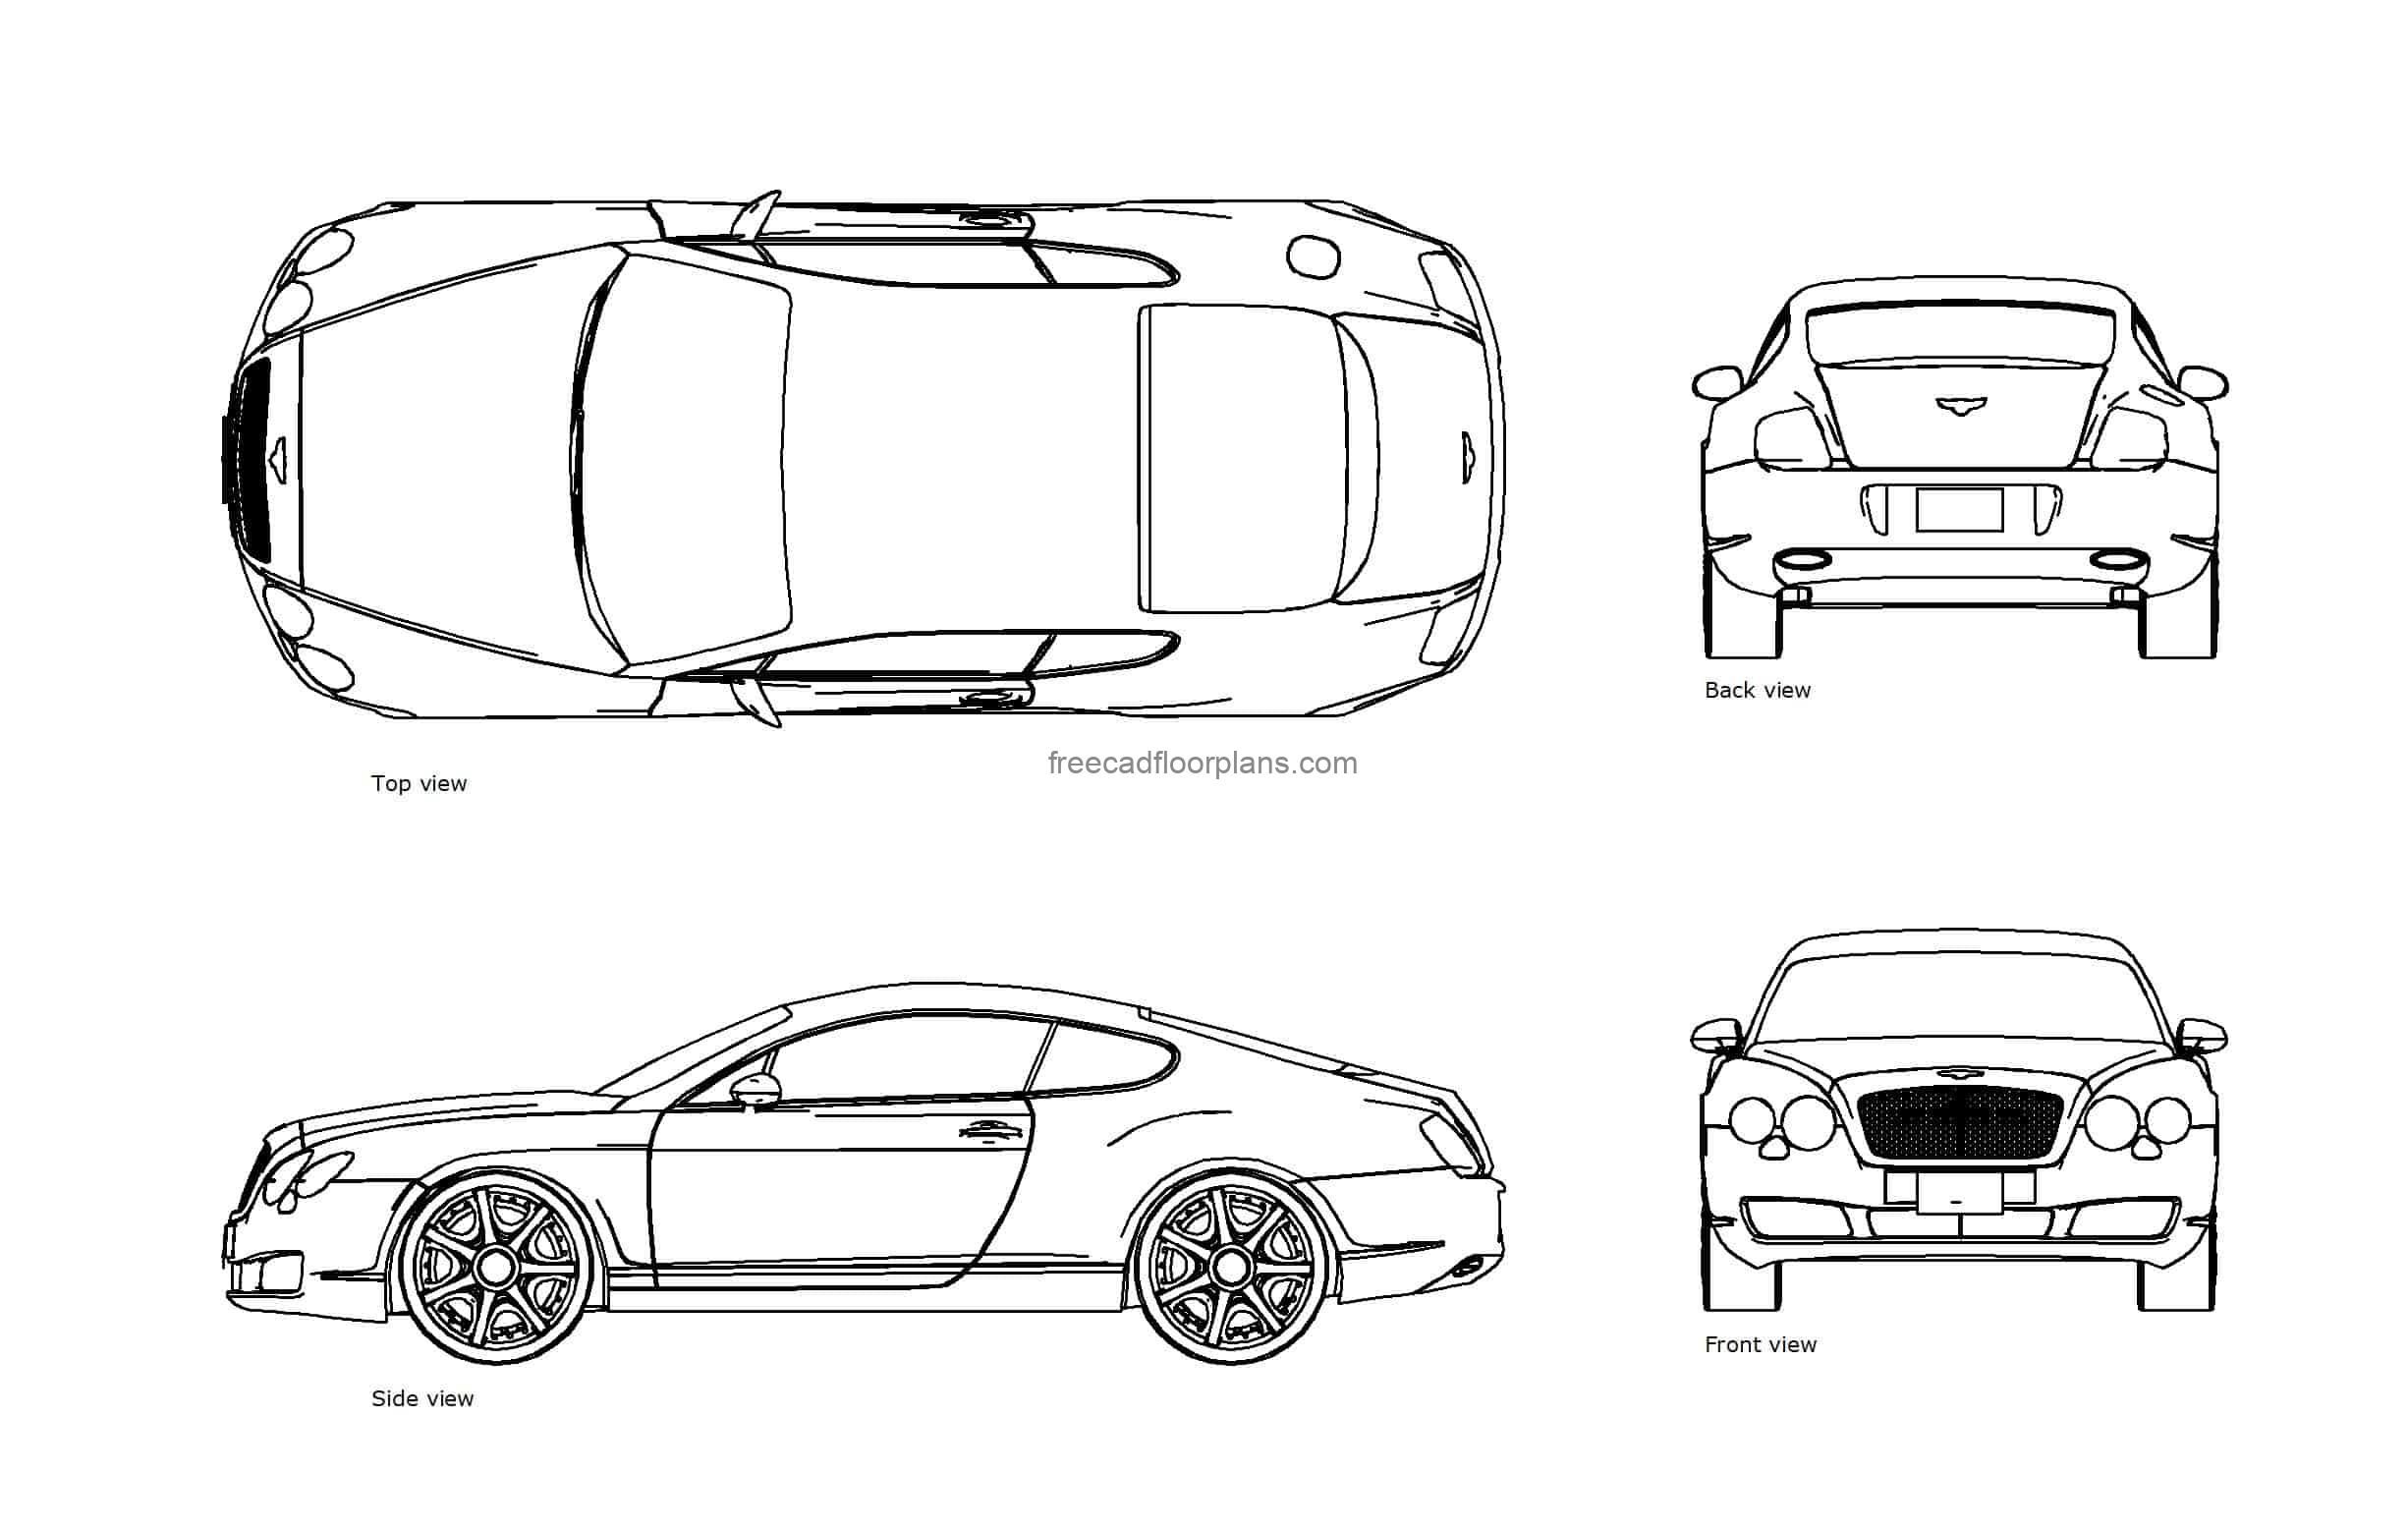 autocad drawing of a bentley continental, plan and elevation 2d views, dwg file free for download